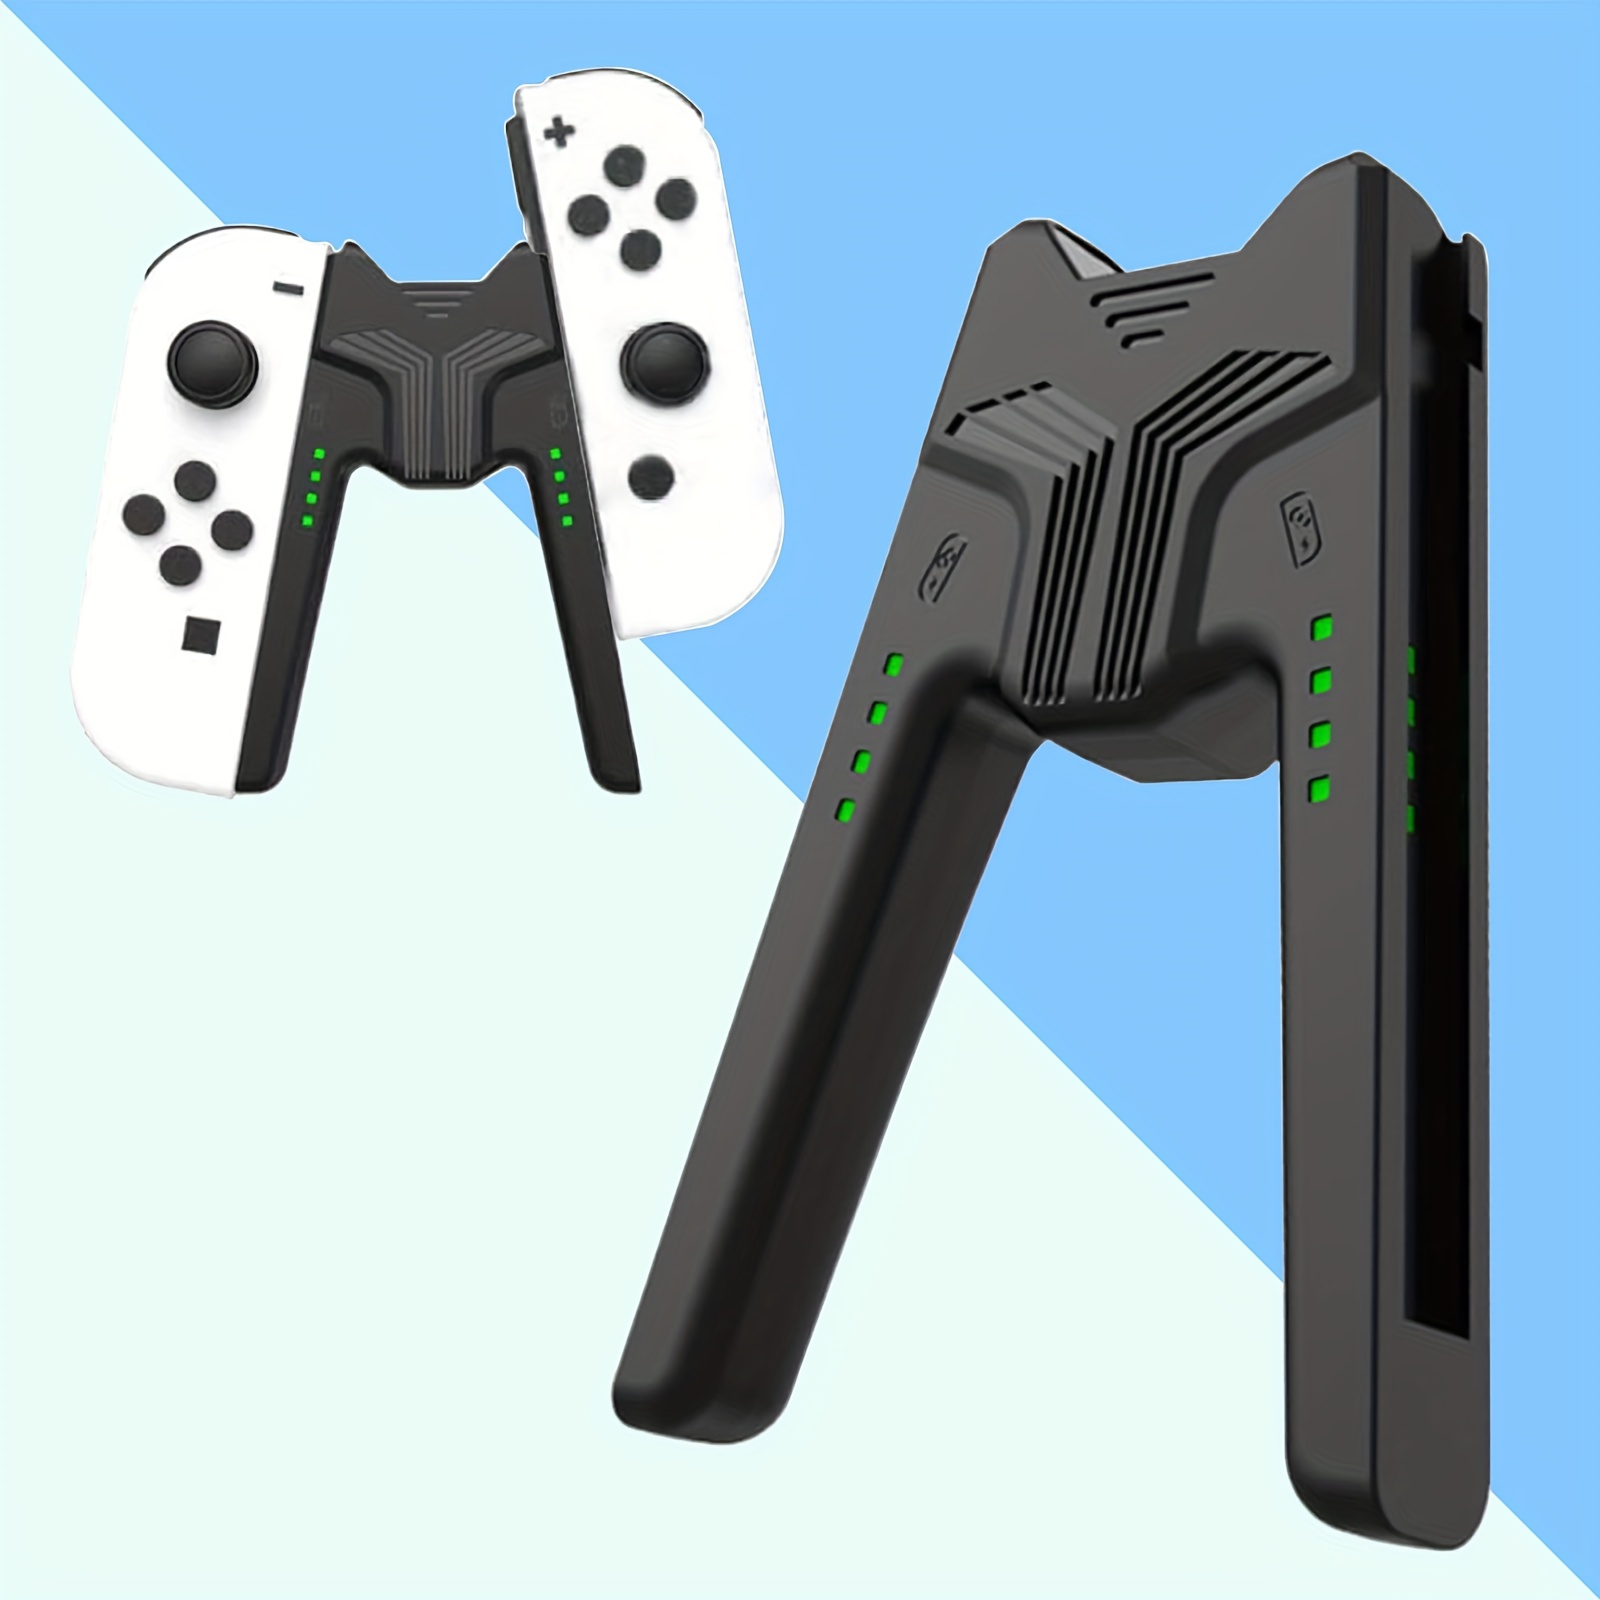 

Charging Grip For Nintendo Switch, Comfort Grip Charger For Switch Oled Joy Con, With Type-c To Usb Cable